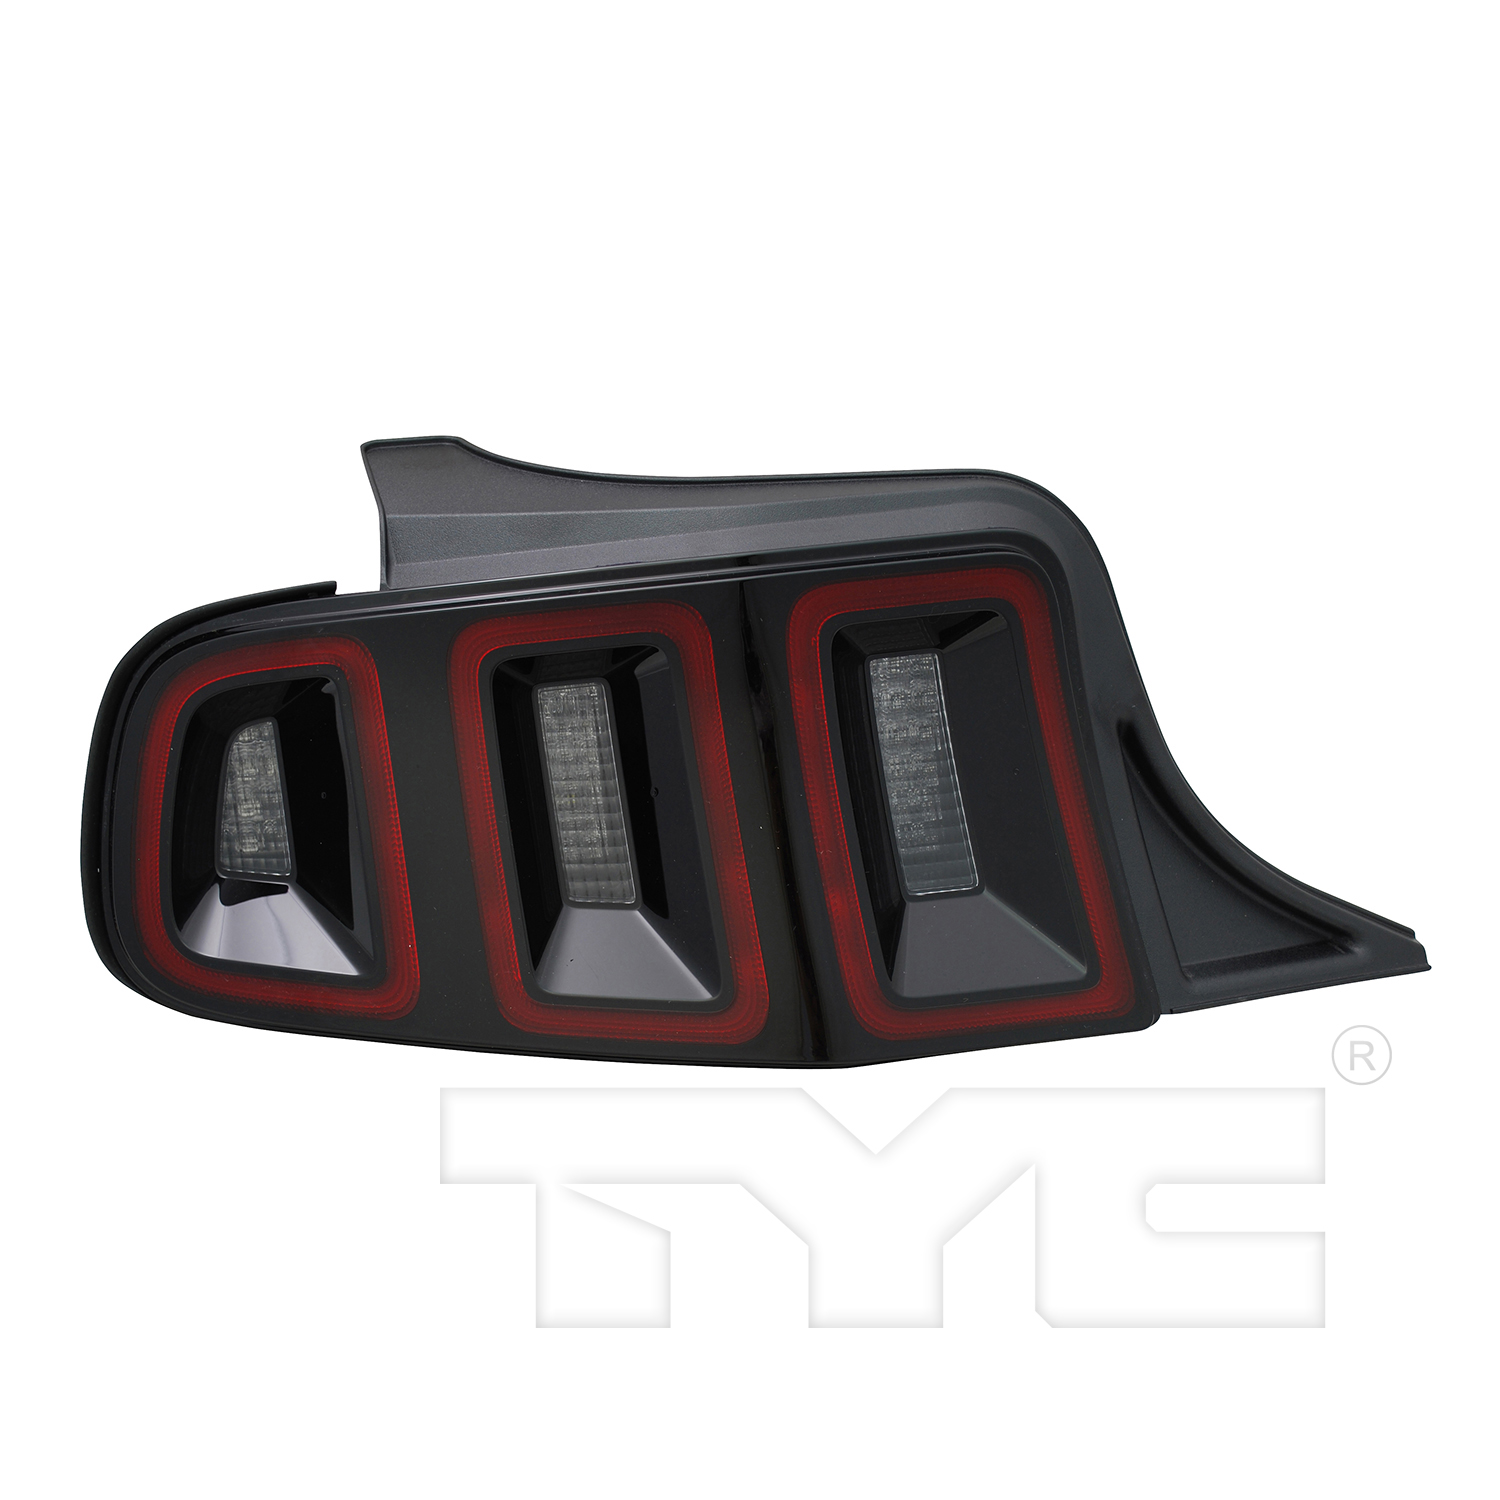 Aftermarket TAILLIGHTS for FORD - MUSTANG, MUSTANG,13-14,LT Taillamp assy